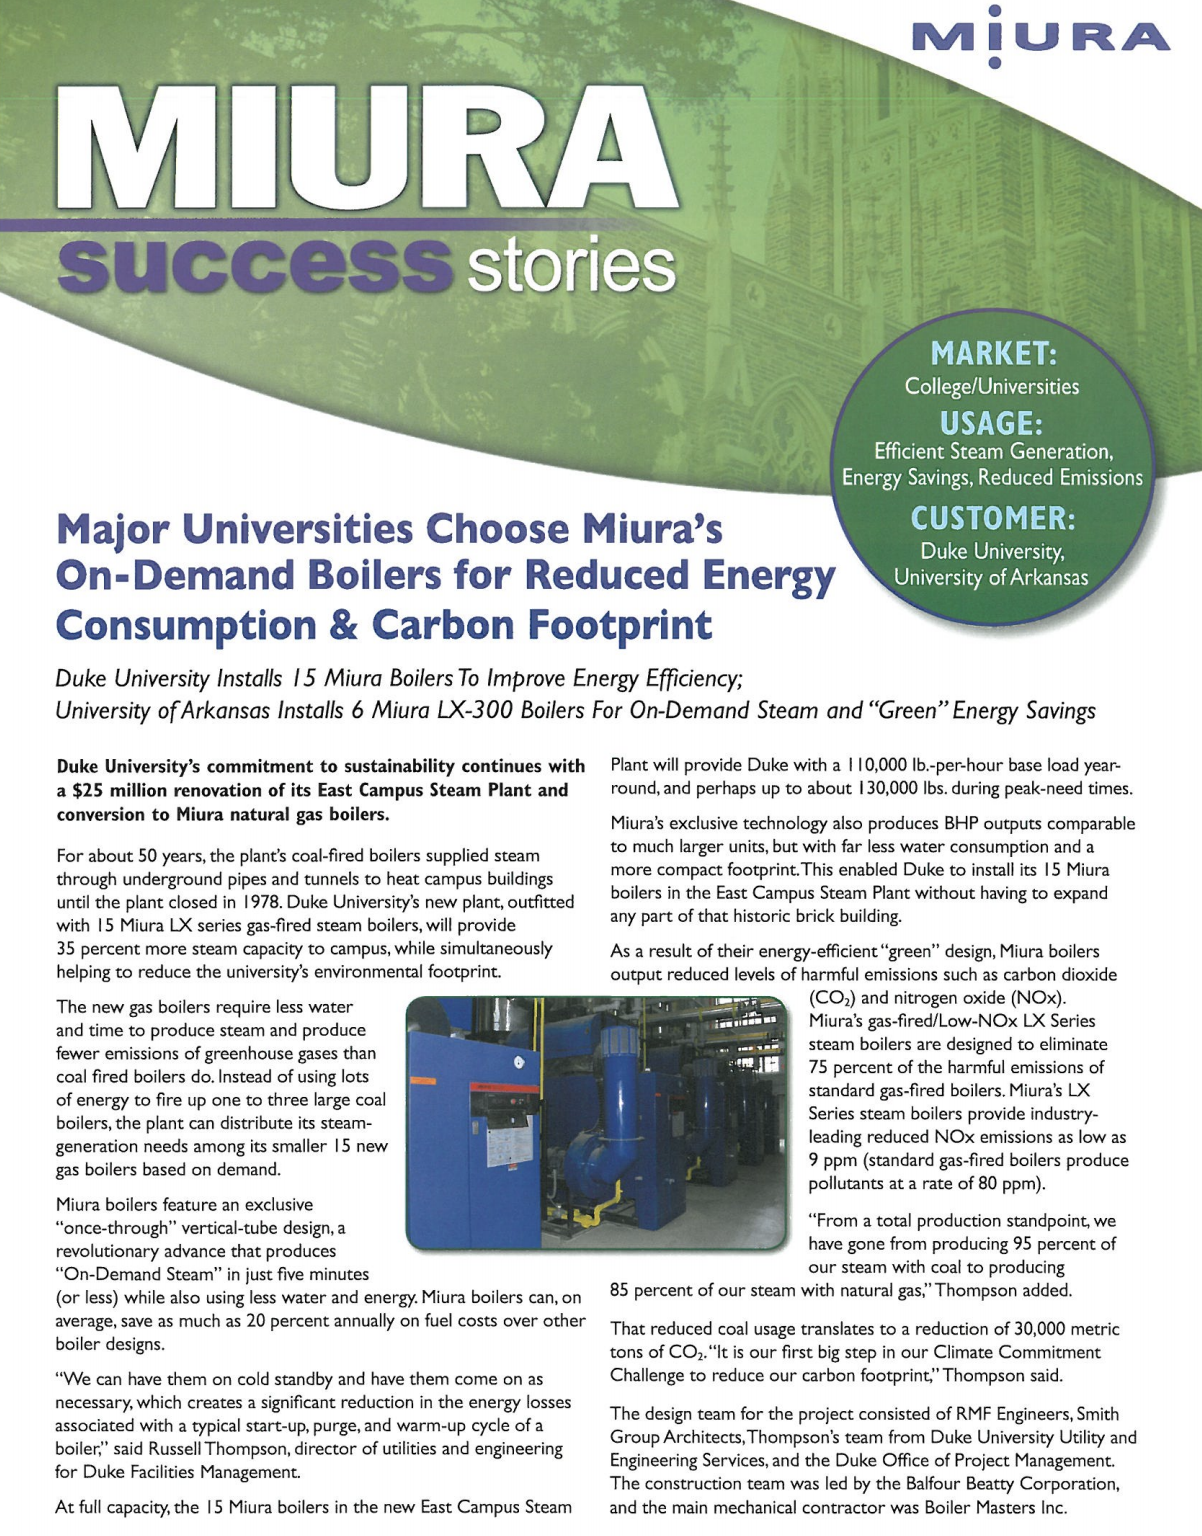 Duke University Reduces Carbon Footprint and Saves Energy with Miura Boilers